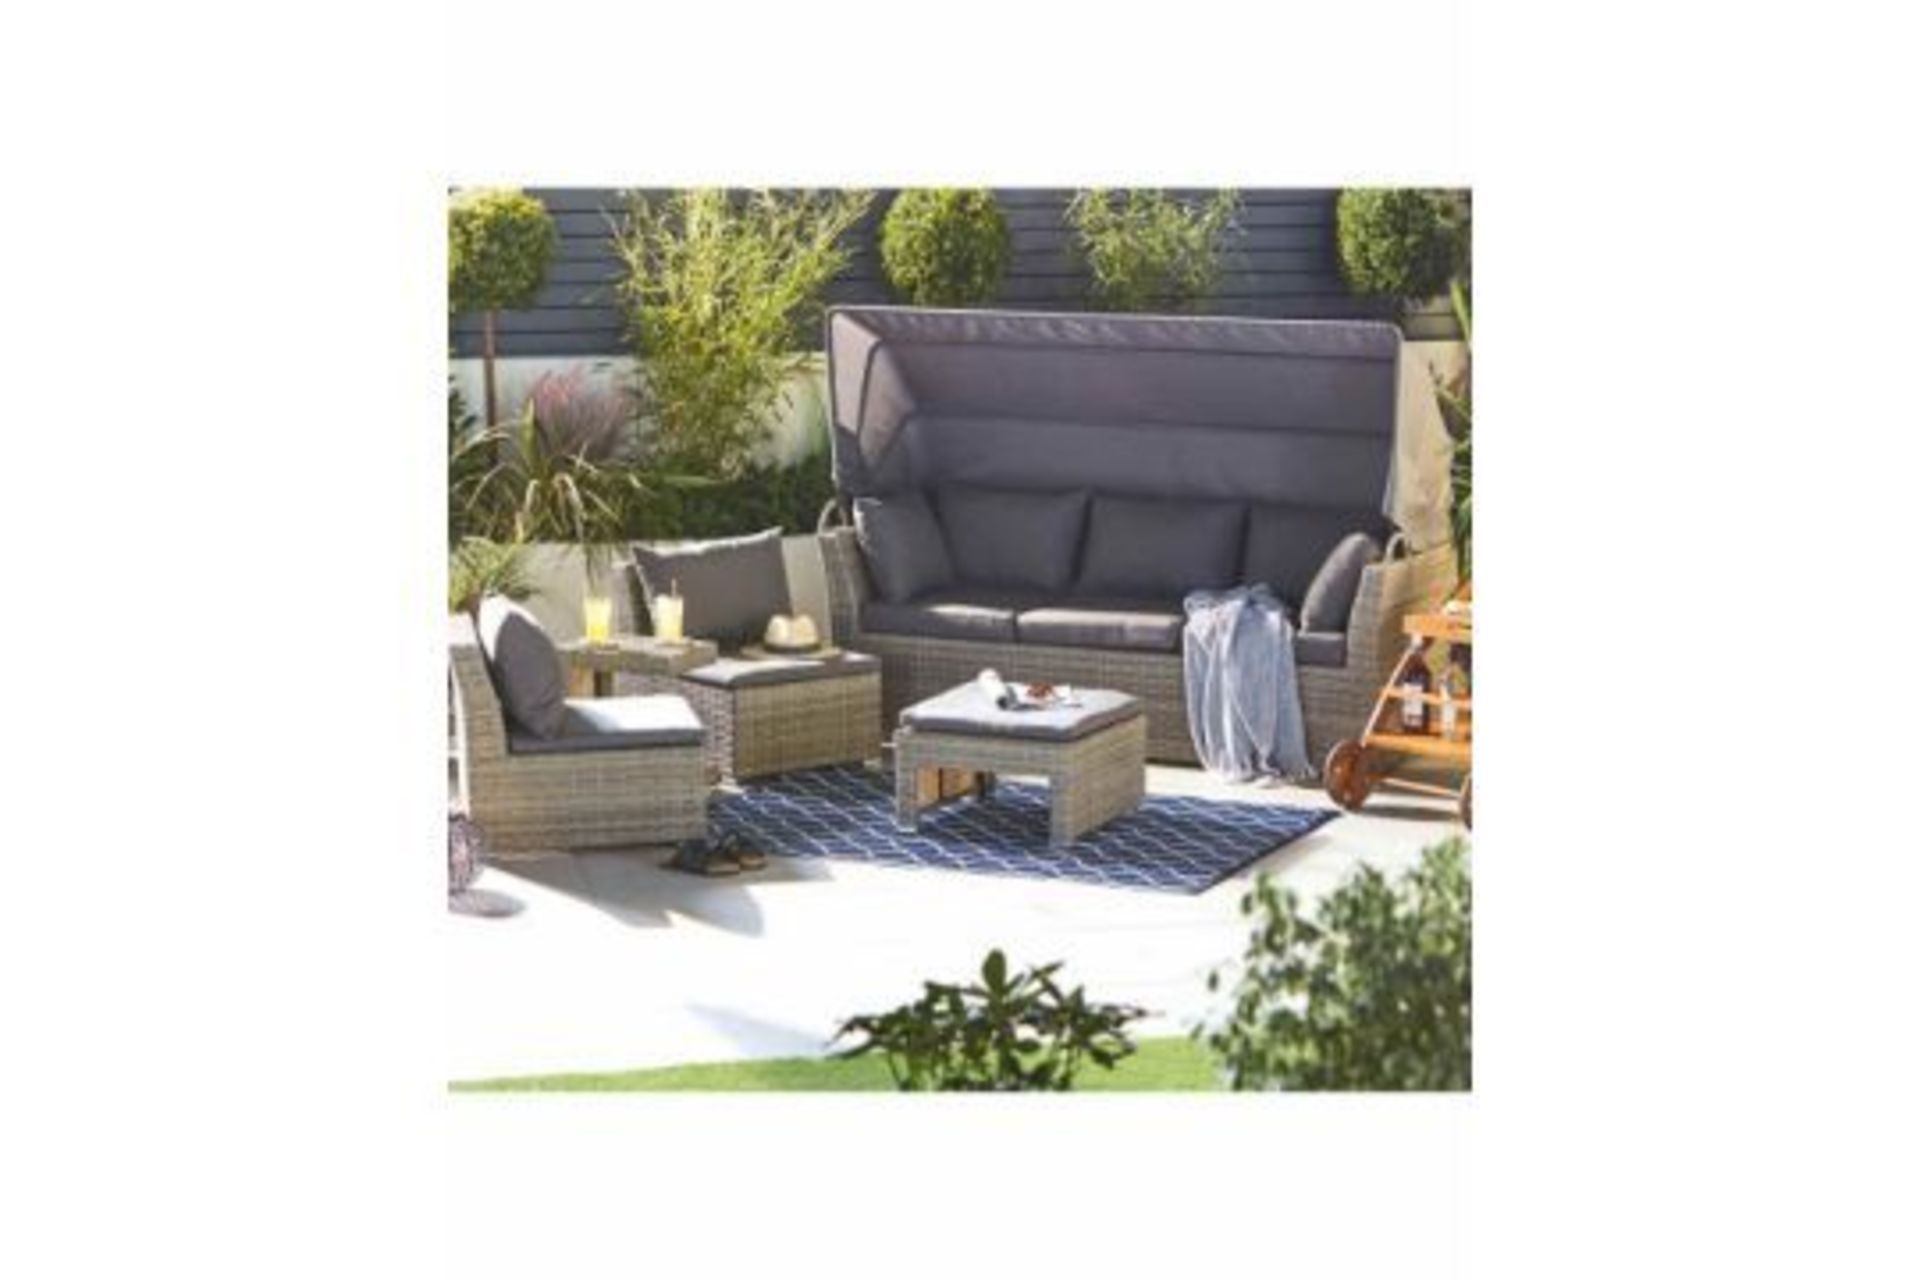 Rattan Effect Sofa Set with Canopy. - H/ST. Soak up the sun and feel that much needed summer